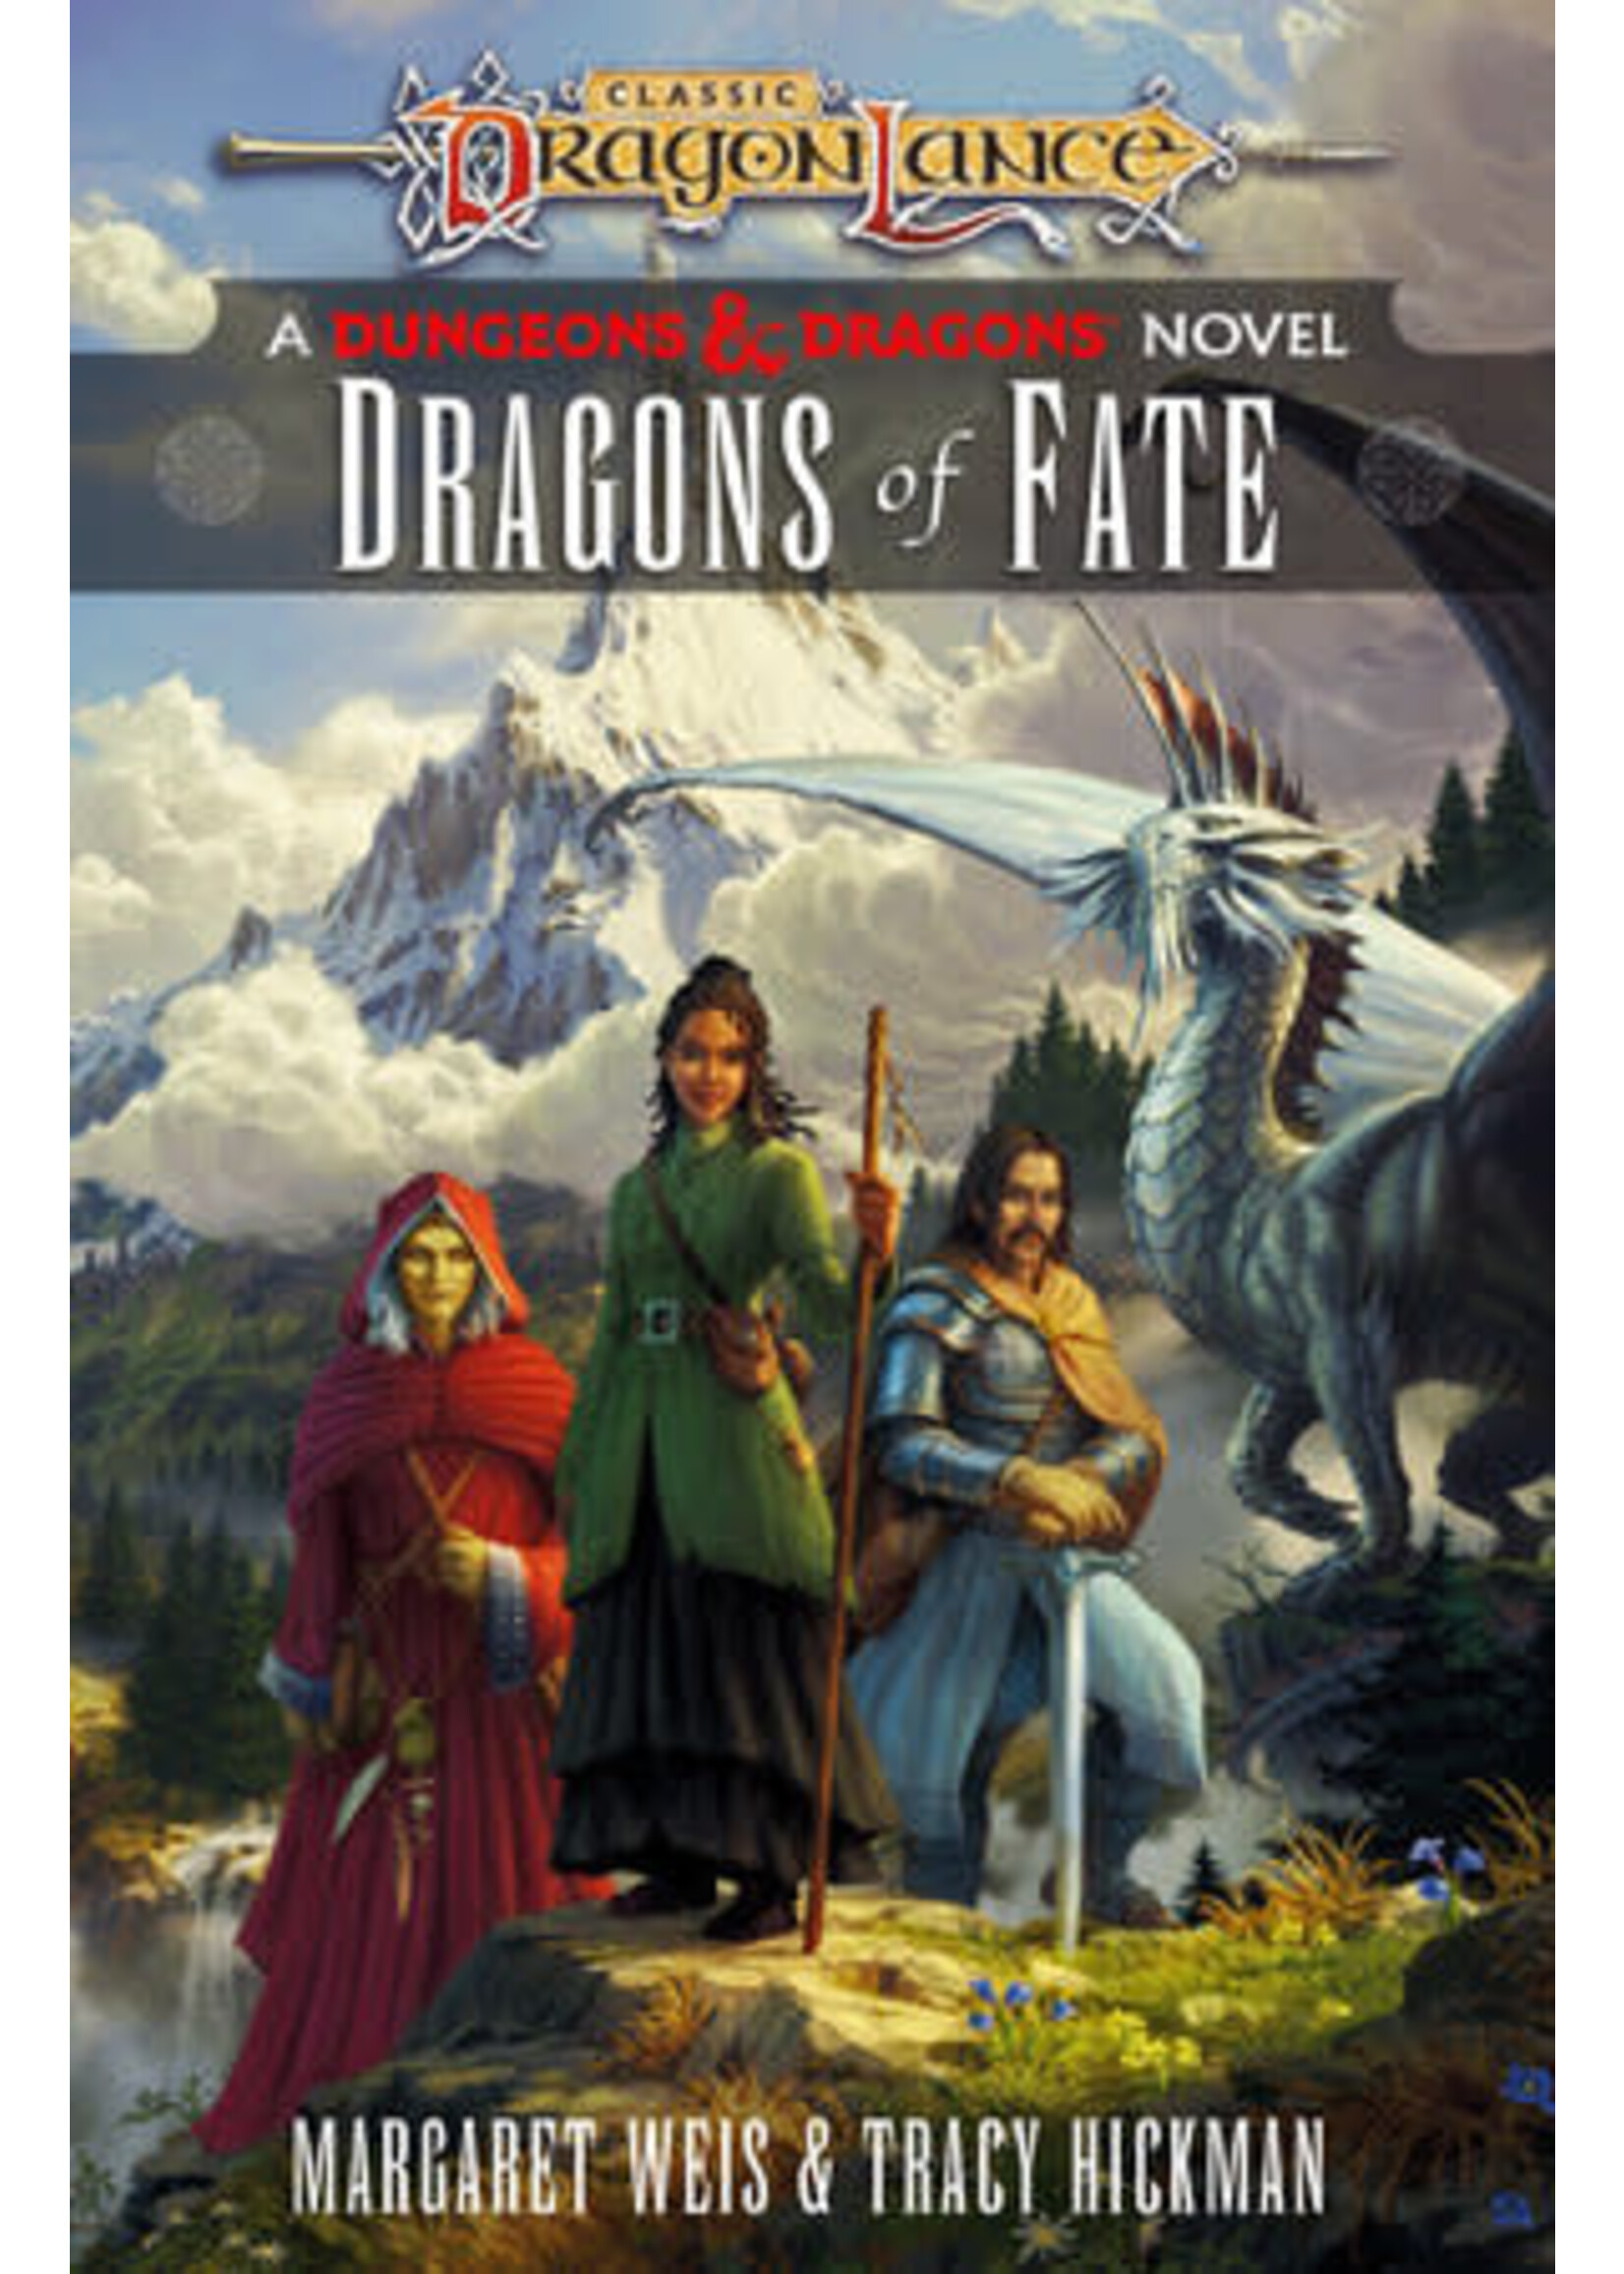 Dragonlance Destinies 2: Dragons of Fate (Dungeons & Dragons Novel)